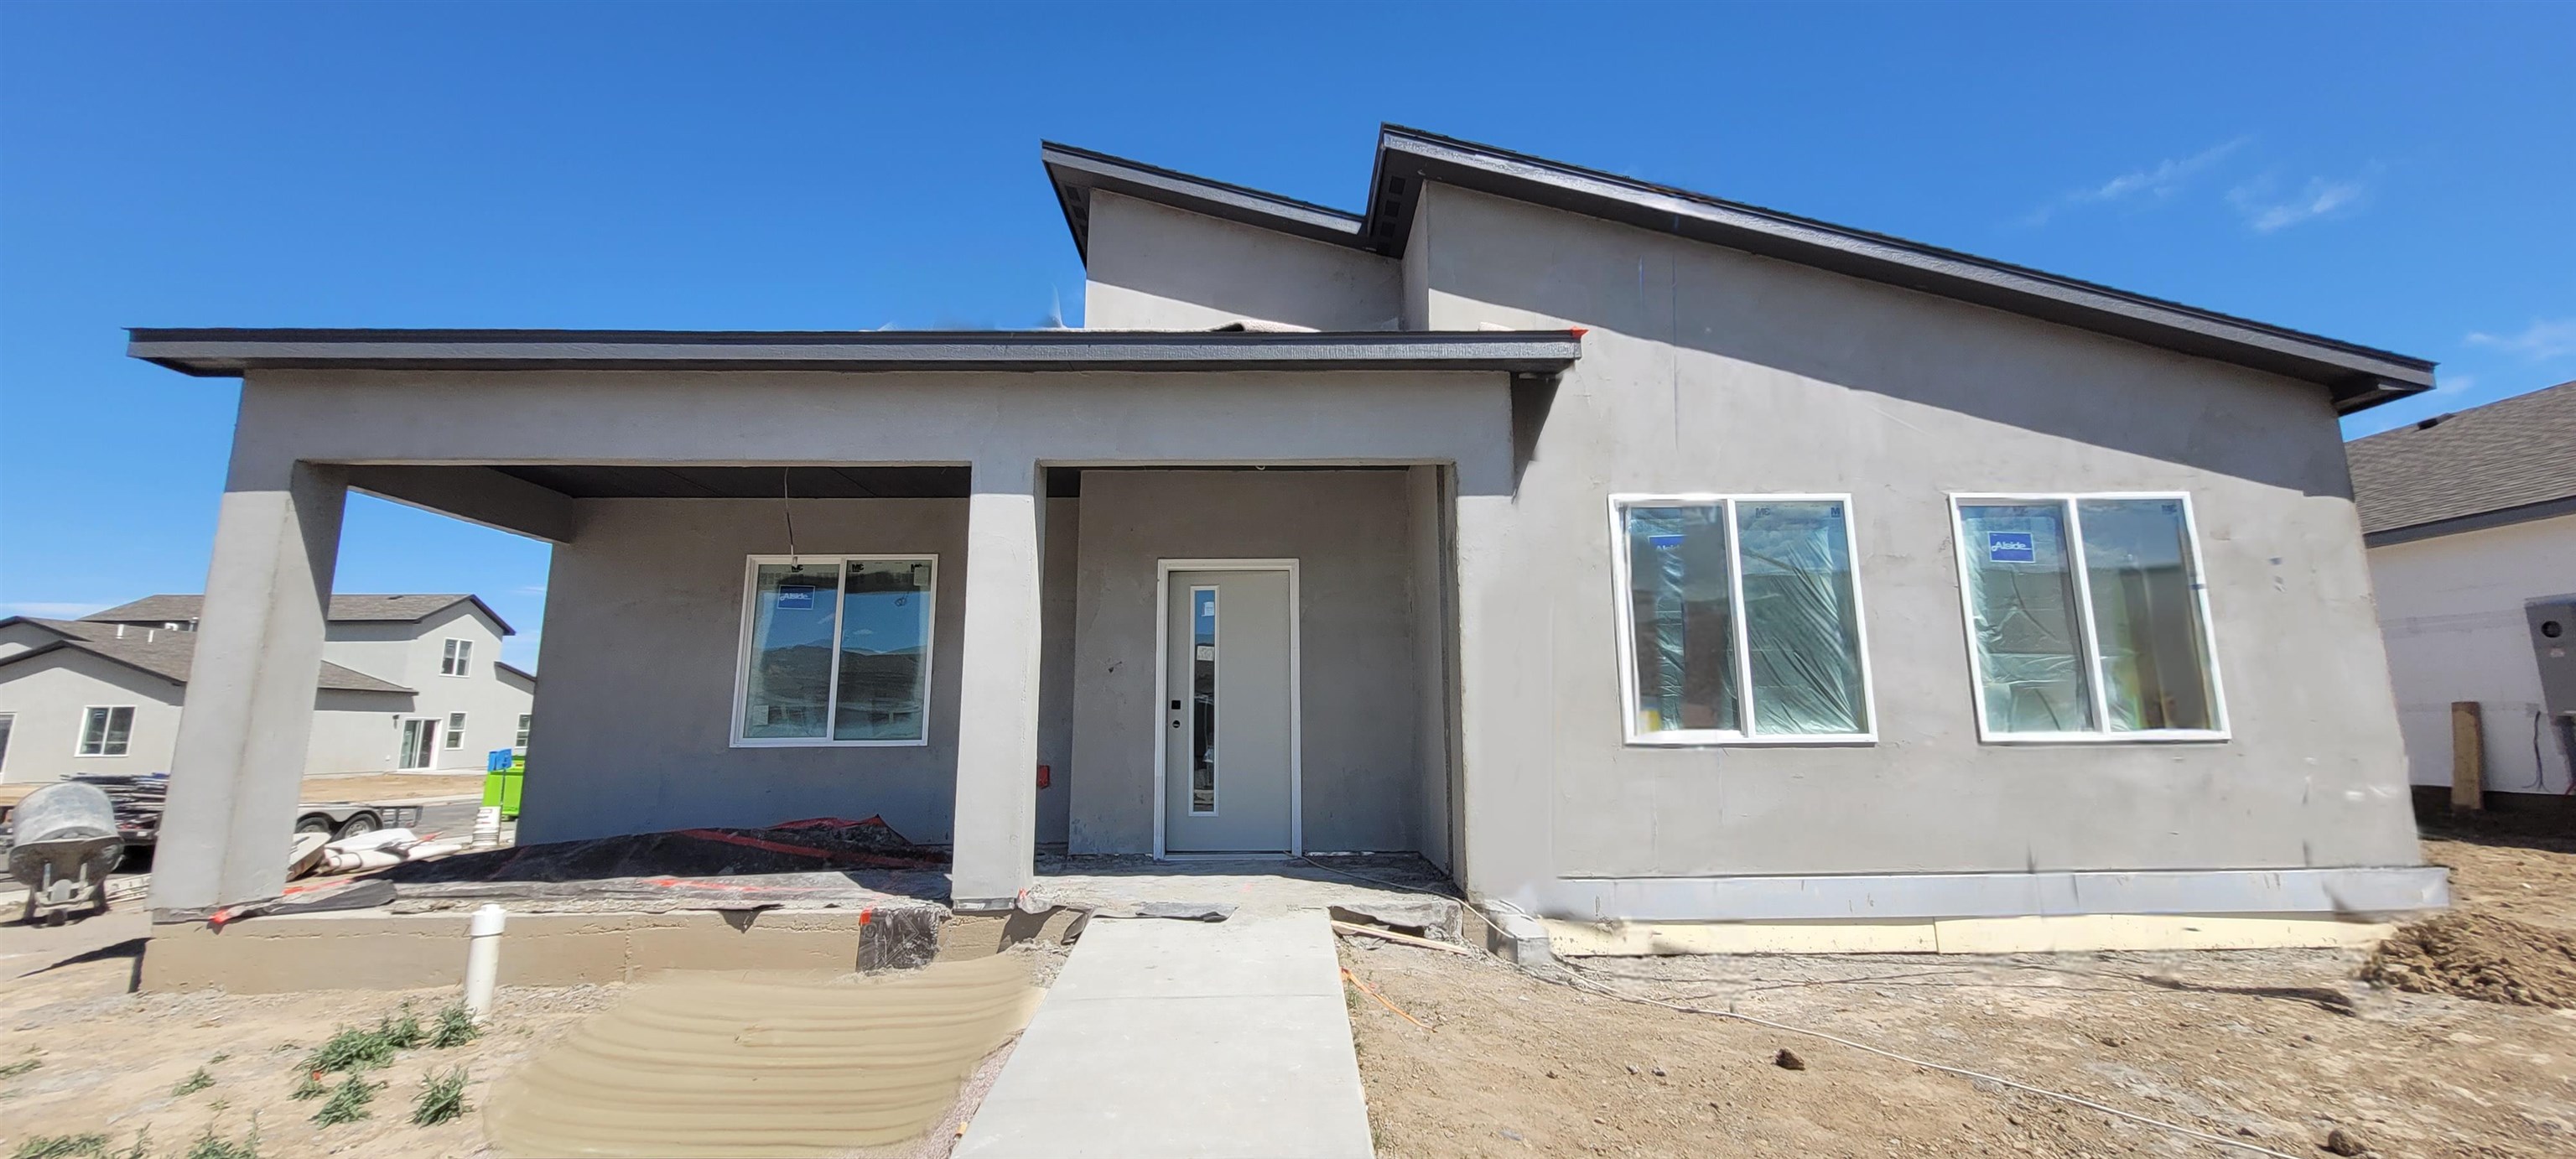 Welcome to Iron Wheel subdivision where affordability meets function!  TWO UNIQUE AND CREATIVE PREFERRED LENDER OPTIONS THAT MAY SAVE YOU UP TO SEVERAL HUNDRED DOLLARS ON YOUR PAYMENT - NO GIMMICKS - CALL FOR DETAILS!  This one-of-a-kind community will have a wide variety of home types and sizes, a walking path to FMHS & easy access to both GJ & Fruita. Pricing includes xeriscaping & fencing. These well-planned homes offer maximum functional use of space, durable yet beautiful finishes & cute outdoor living spaces that require minimal maintenance. 3 Bed, 2 bath, 2 car gar, 1839 sq ft. NO FINISH OPTIONS. Our Builder Advantage program can help you get 1% in closing costs through sellers preferred lender. Call for details. Est. completion 5/31/24.